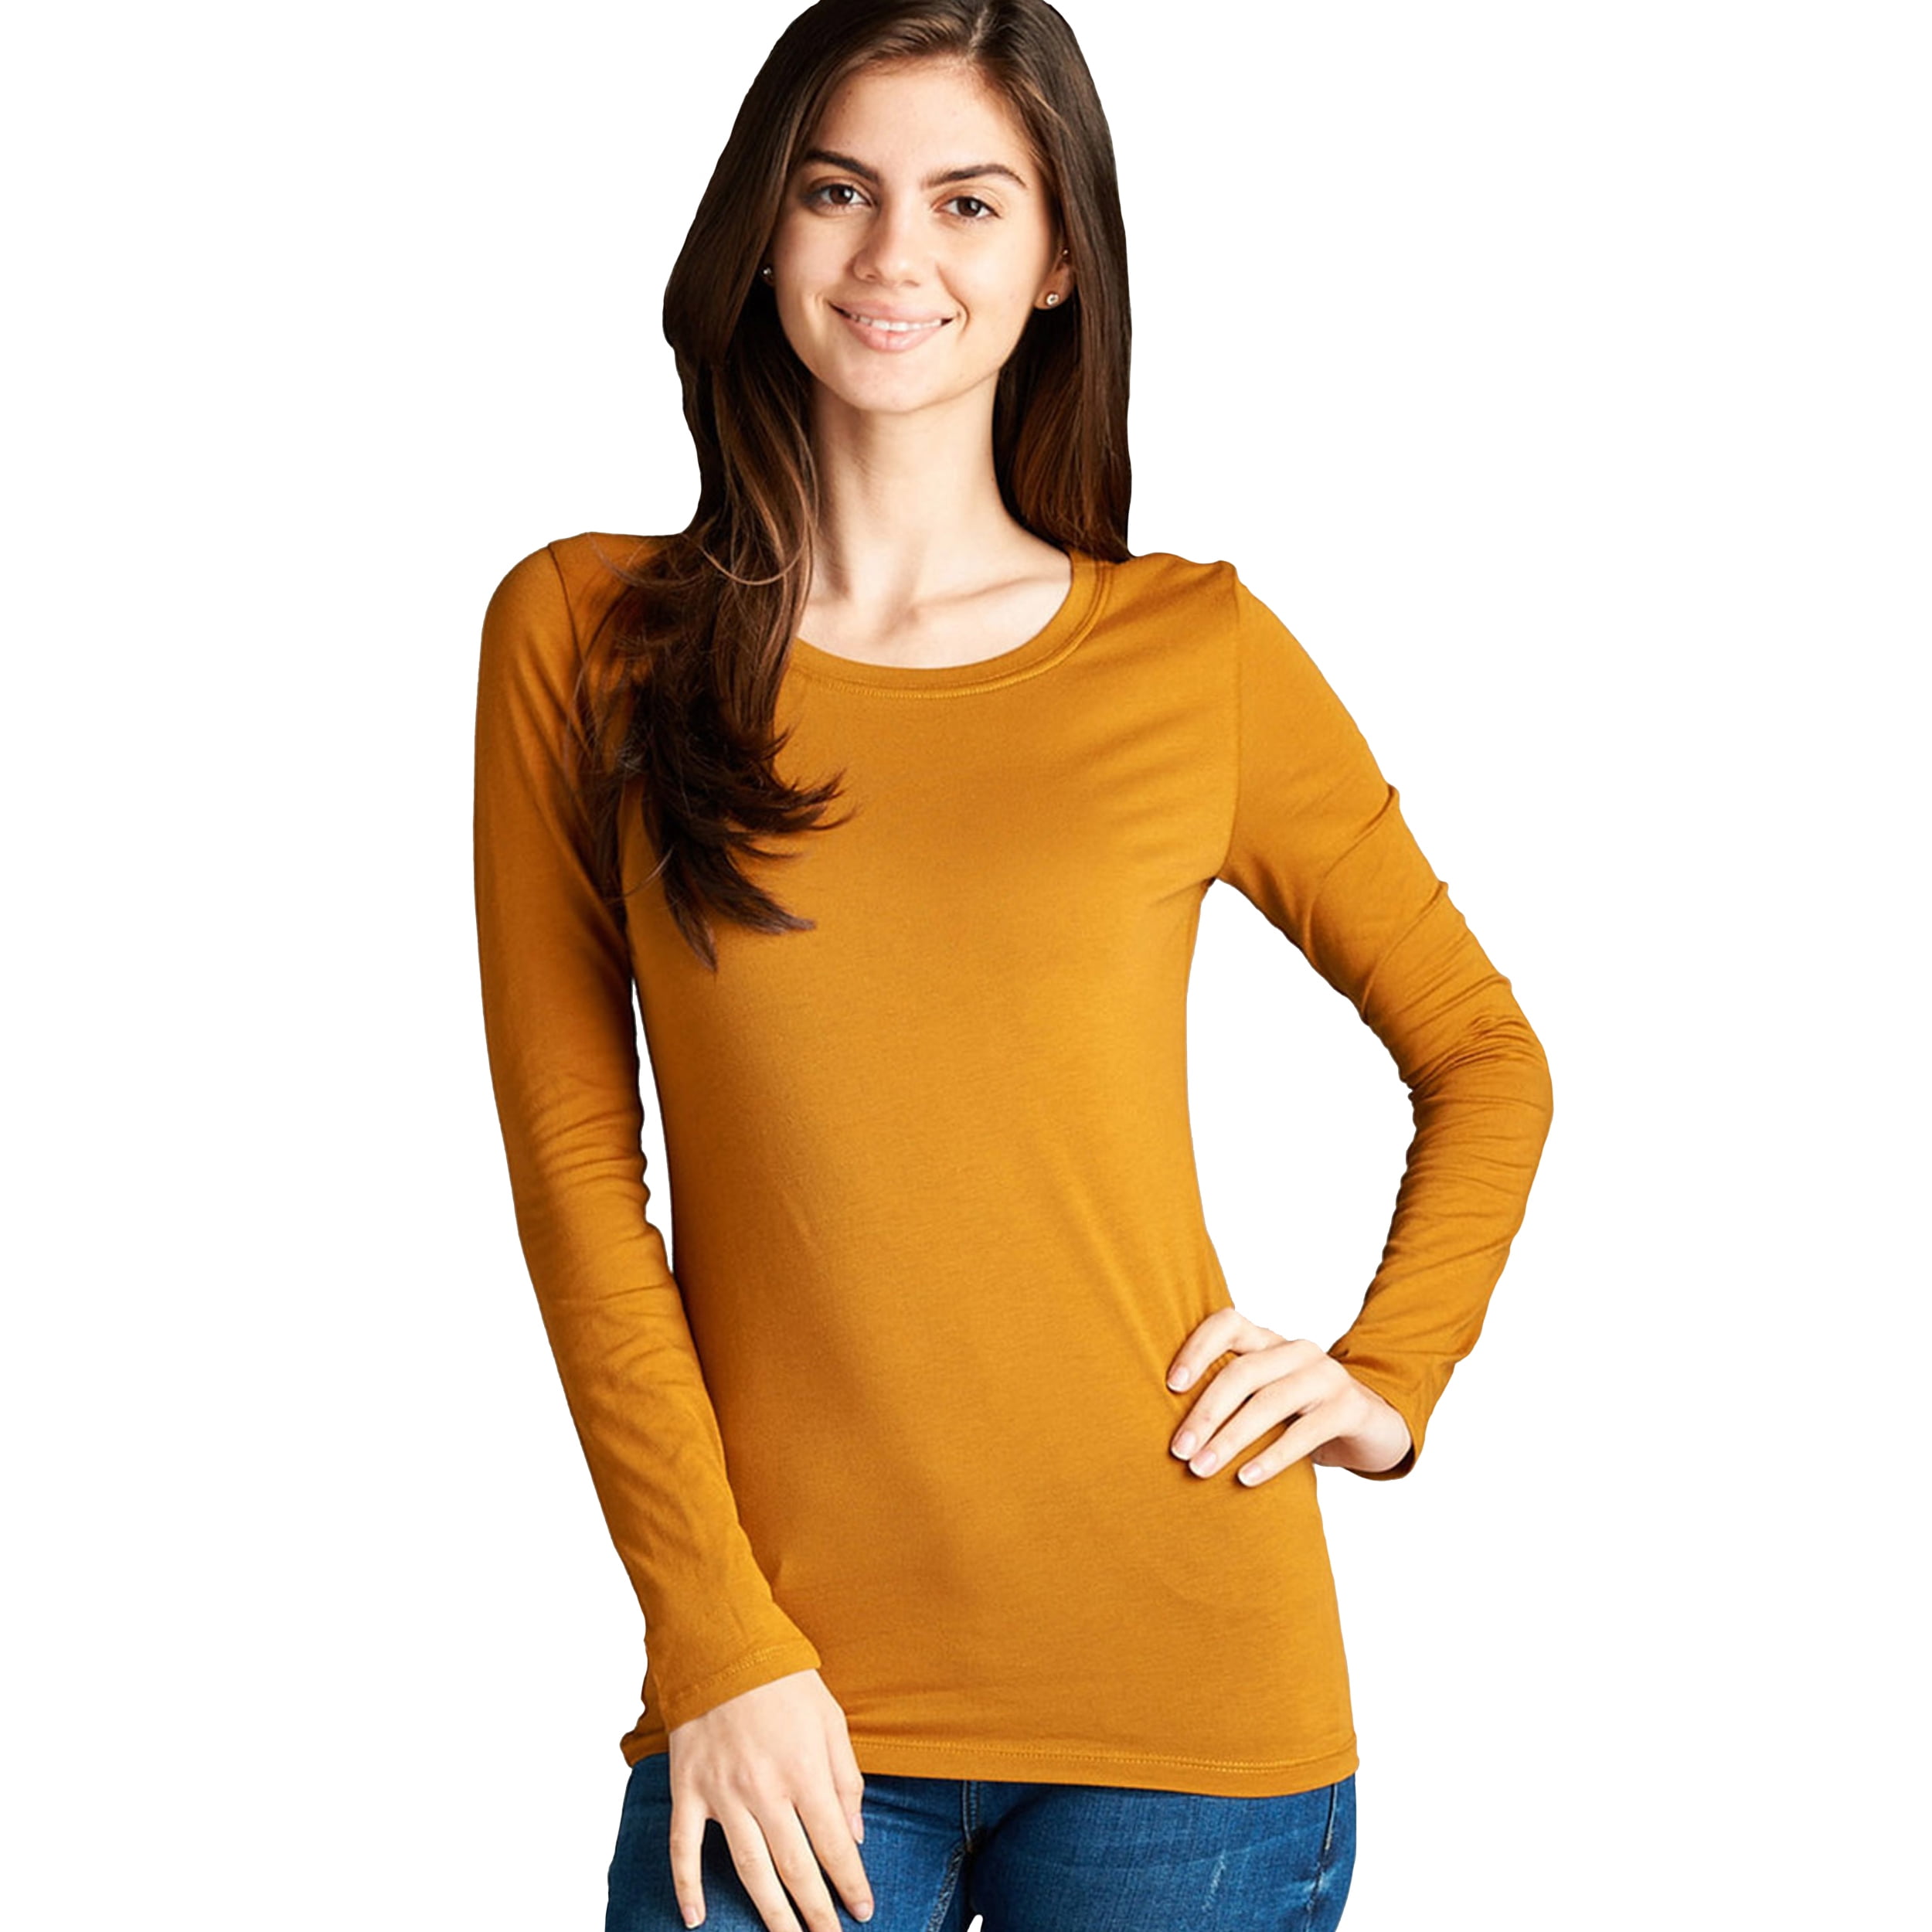 Women's Long Sleeve Round Neck Fitted Top Basic T Shirts (FAST & FREE SHIPPING)